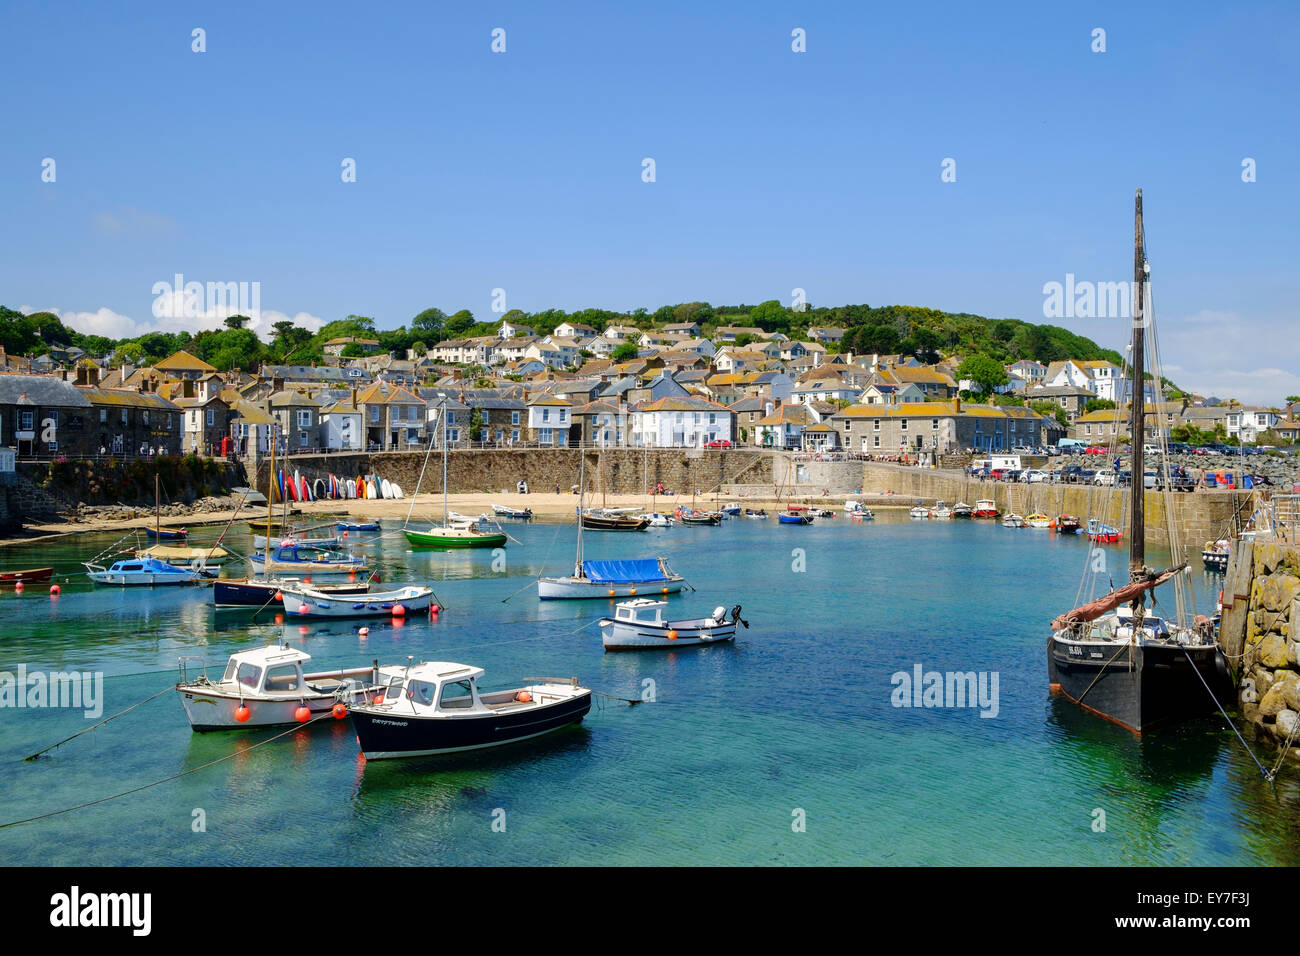 Old fishing village of Mousehole and harbour, West Cornwall, England, UK Stock Photo